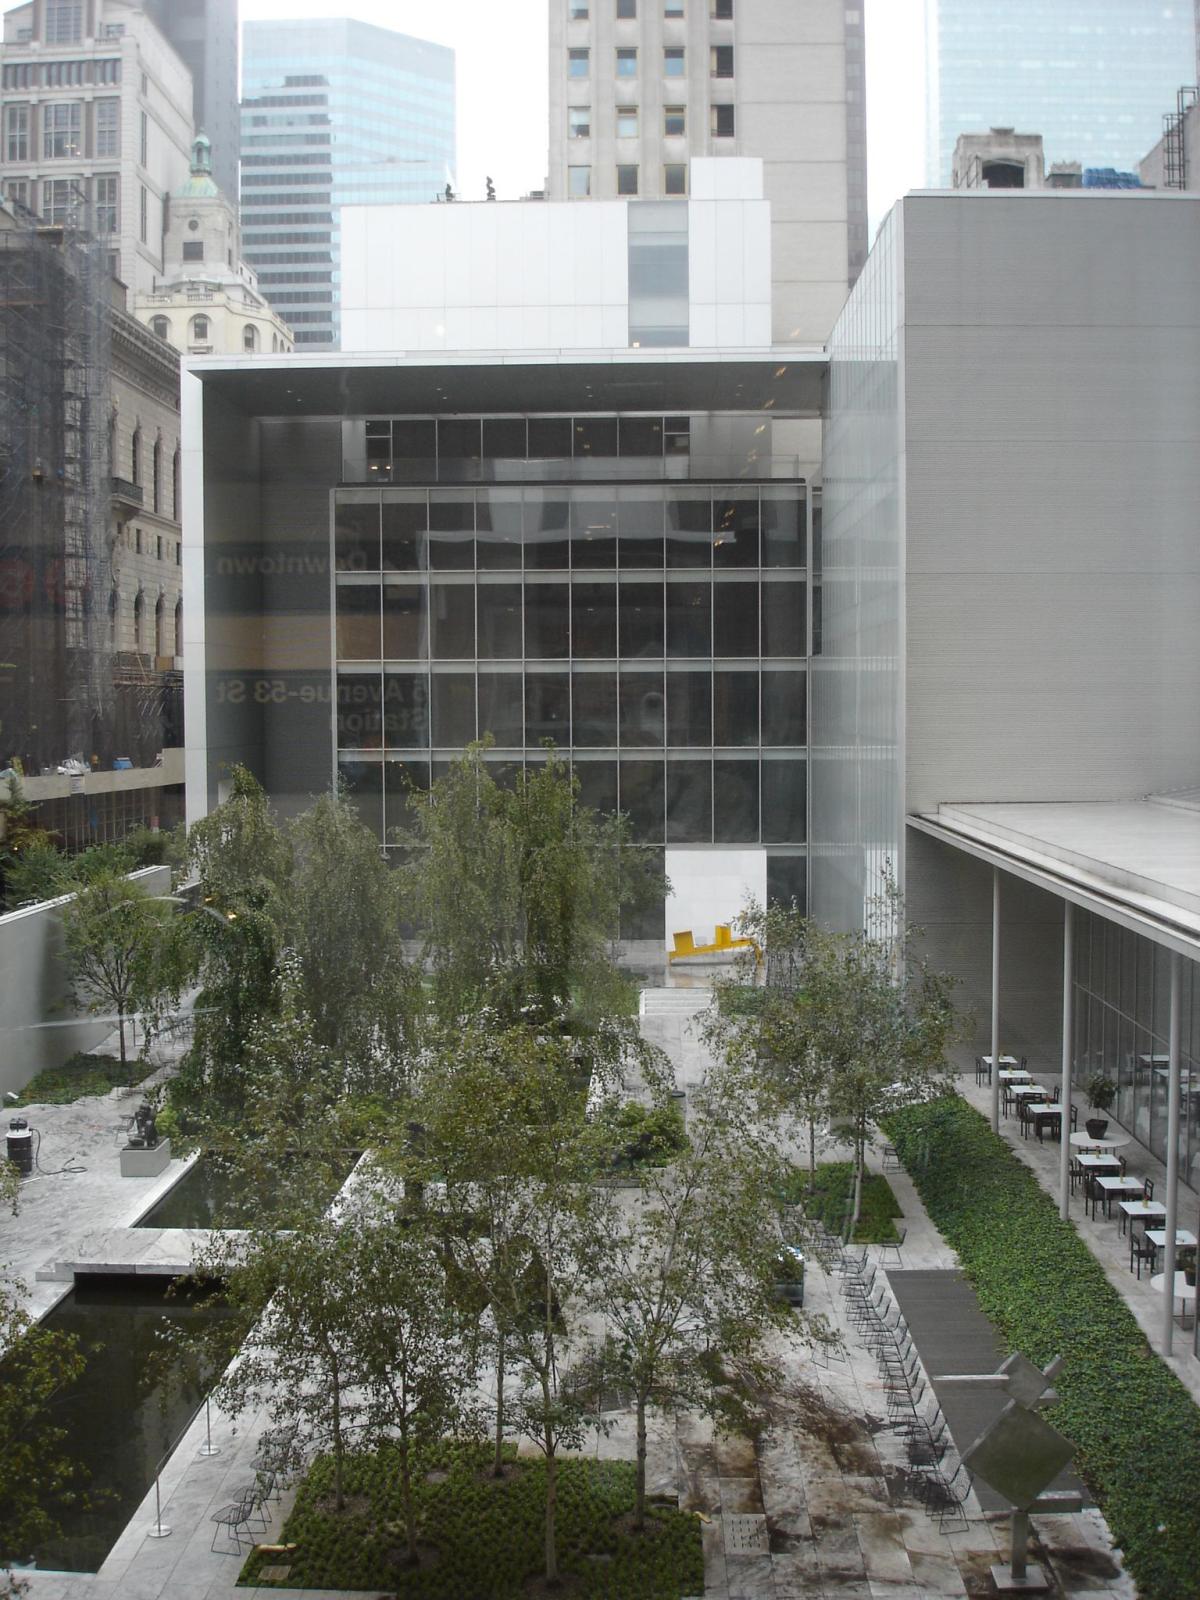 Sculpture Garden at Museum of Modern Art (MoMA) © hibnio, (CC BY 2.0)